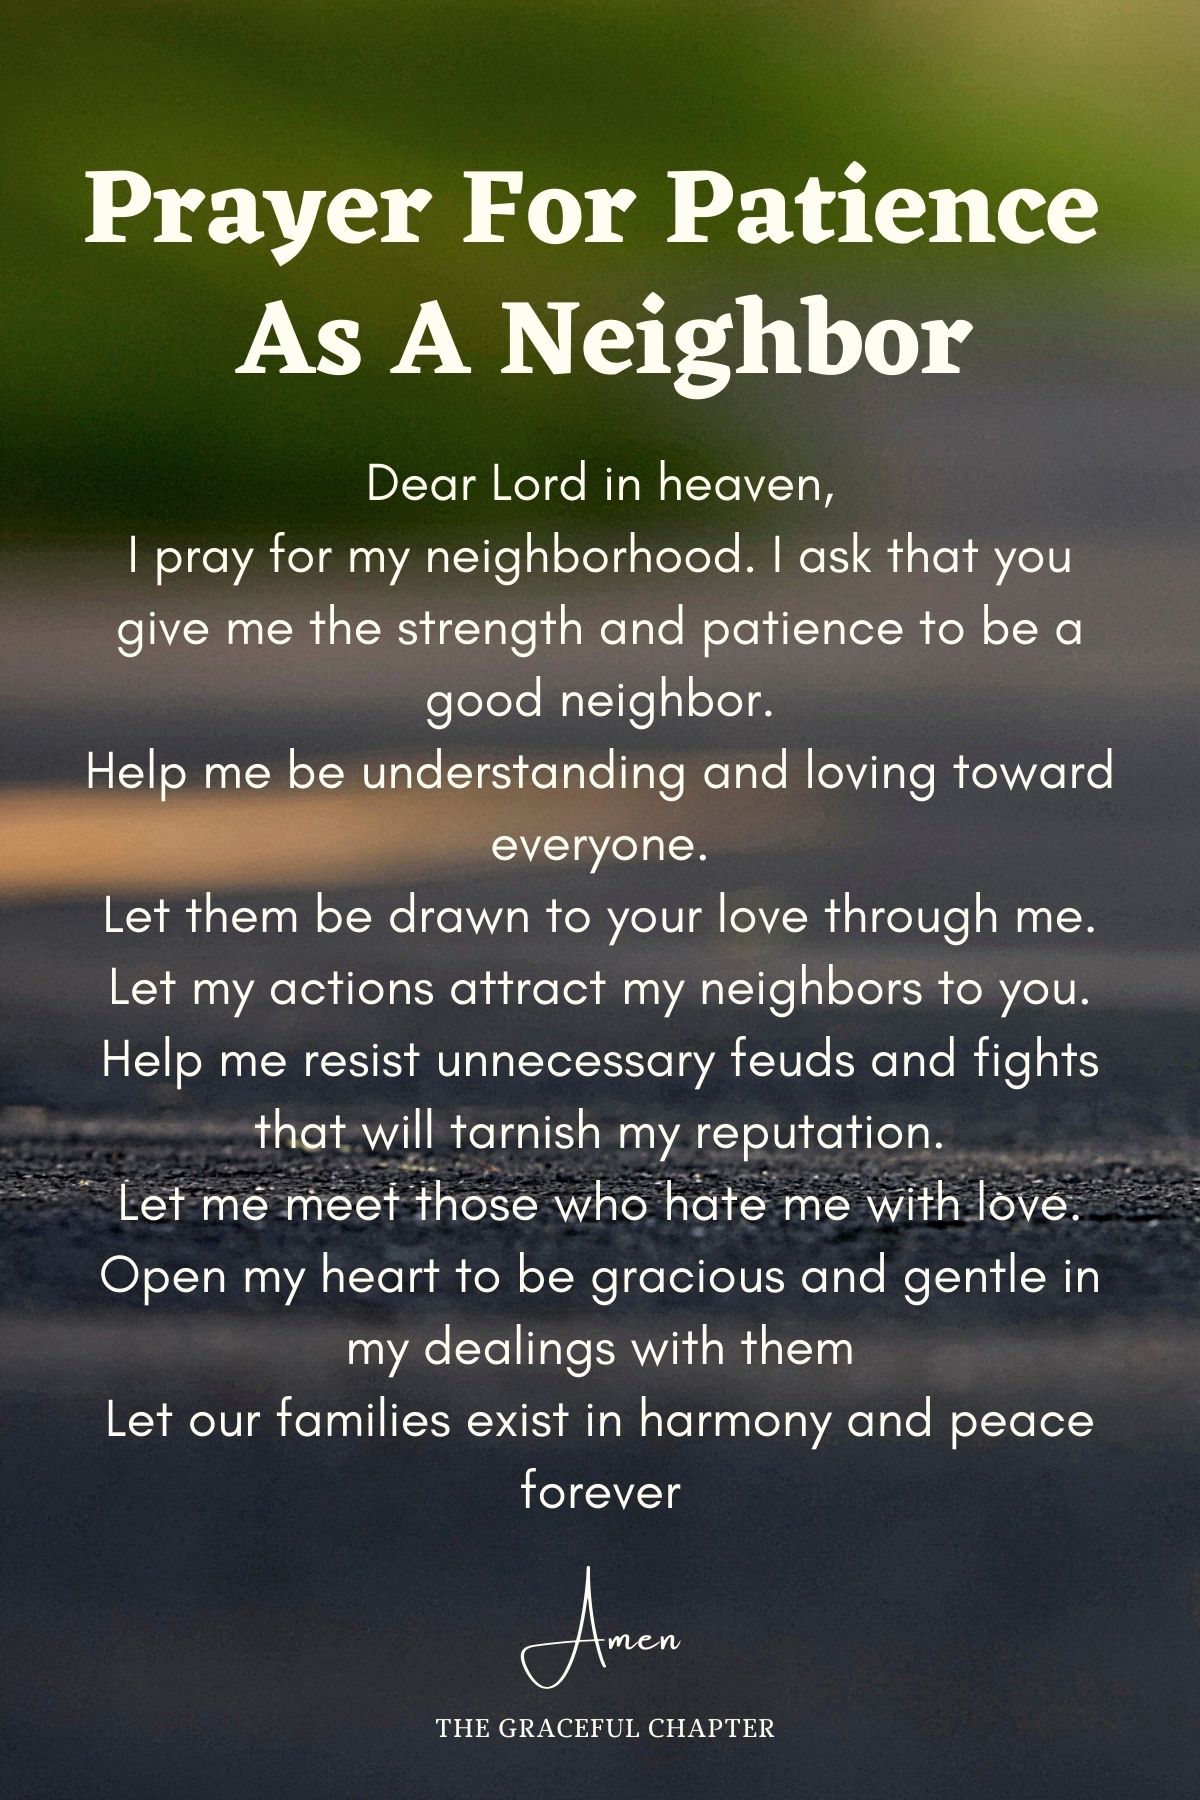 Prayer for patience as a neighbor